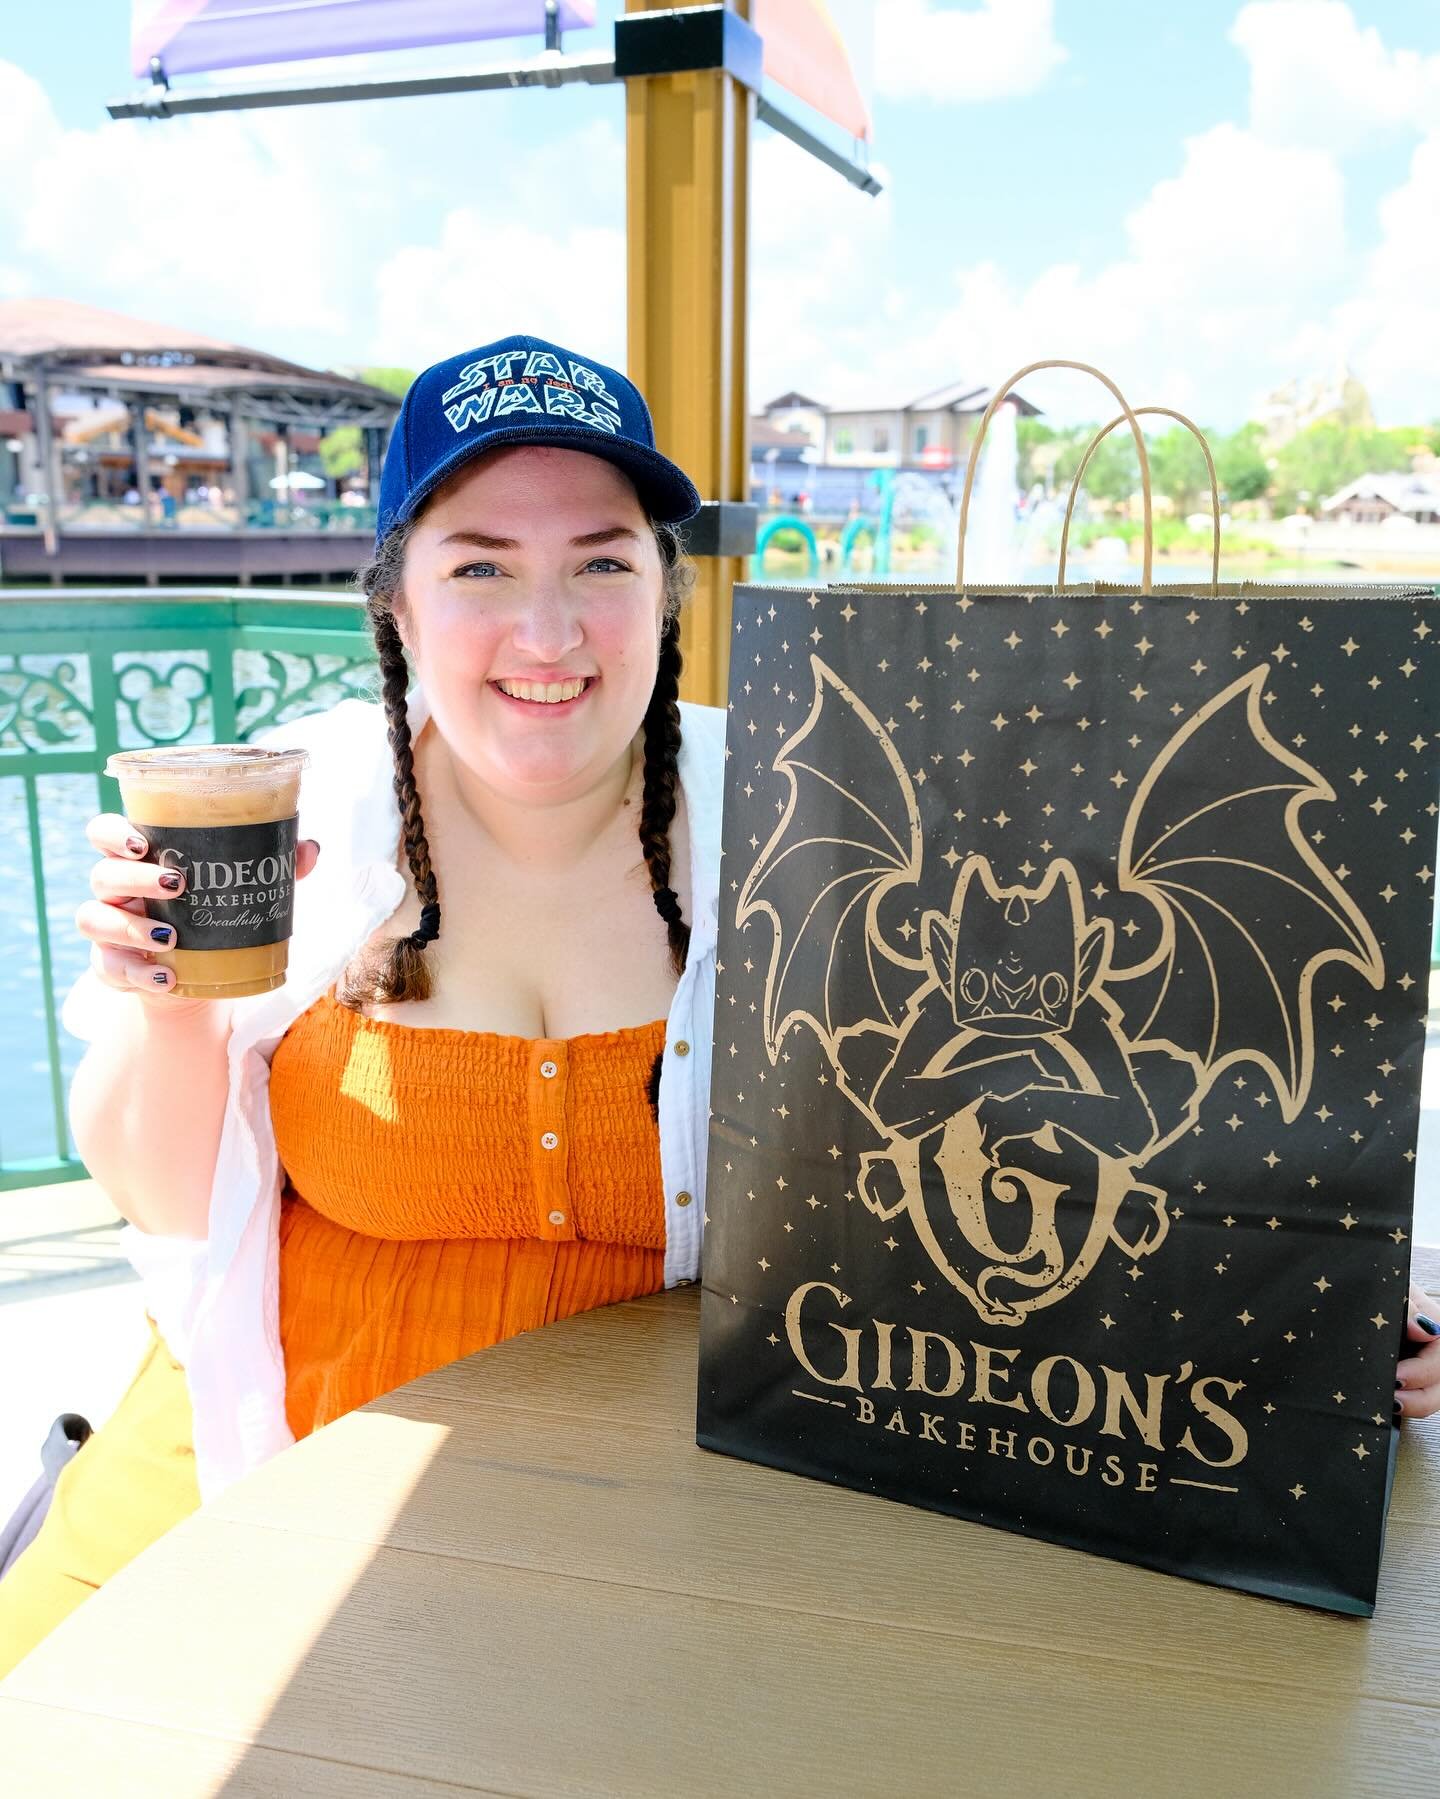 We&rsquo;re back out on our monthly cookie adventure to Disney Springs!

The way I jumped up and ran to Gideon&rsquo;s Bakehouse when I saw my all-time favorite cookie and cake are back on the menu for May! Peanut Butter Cold Brew is back on the menu